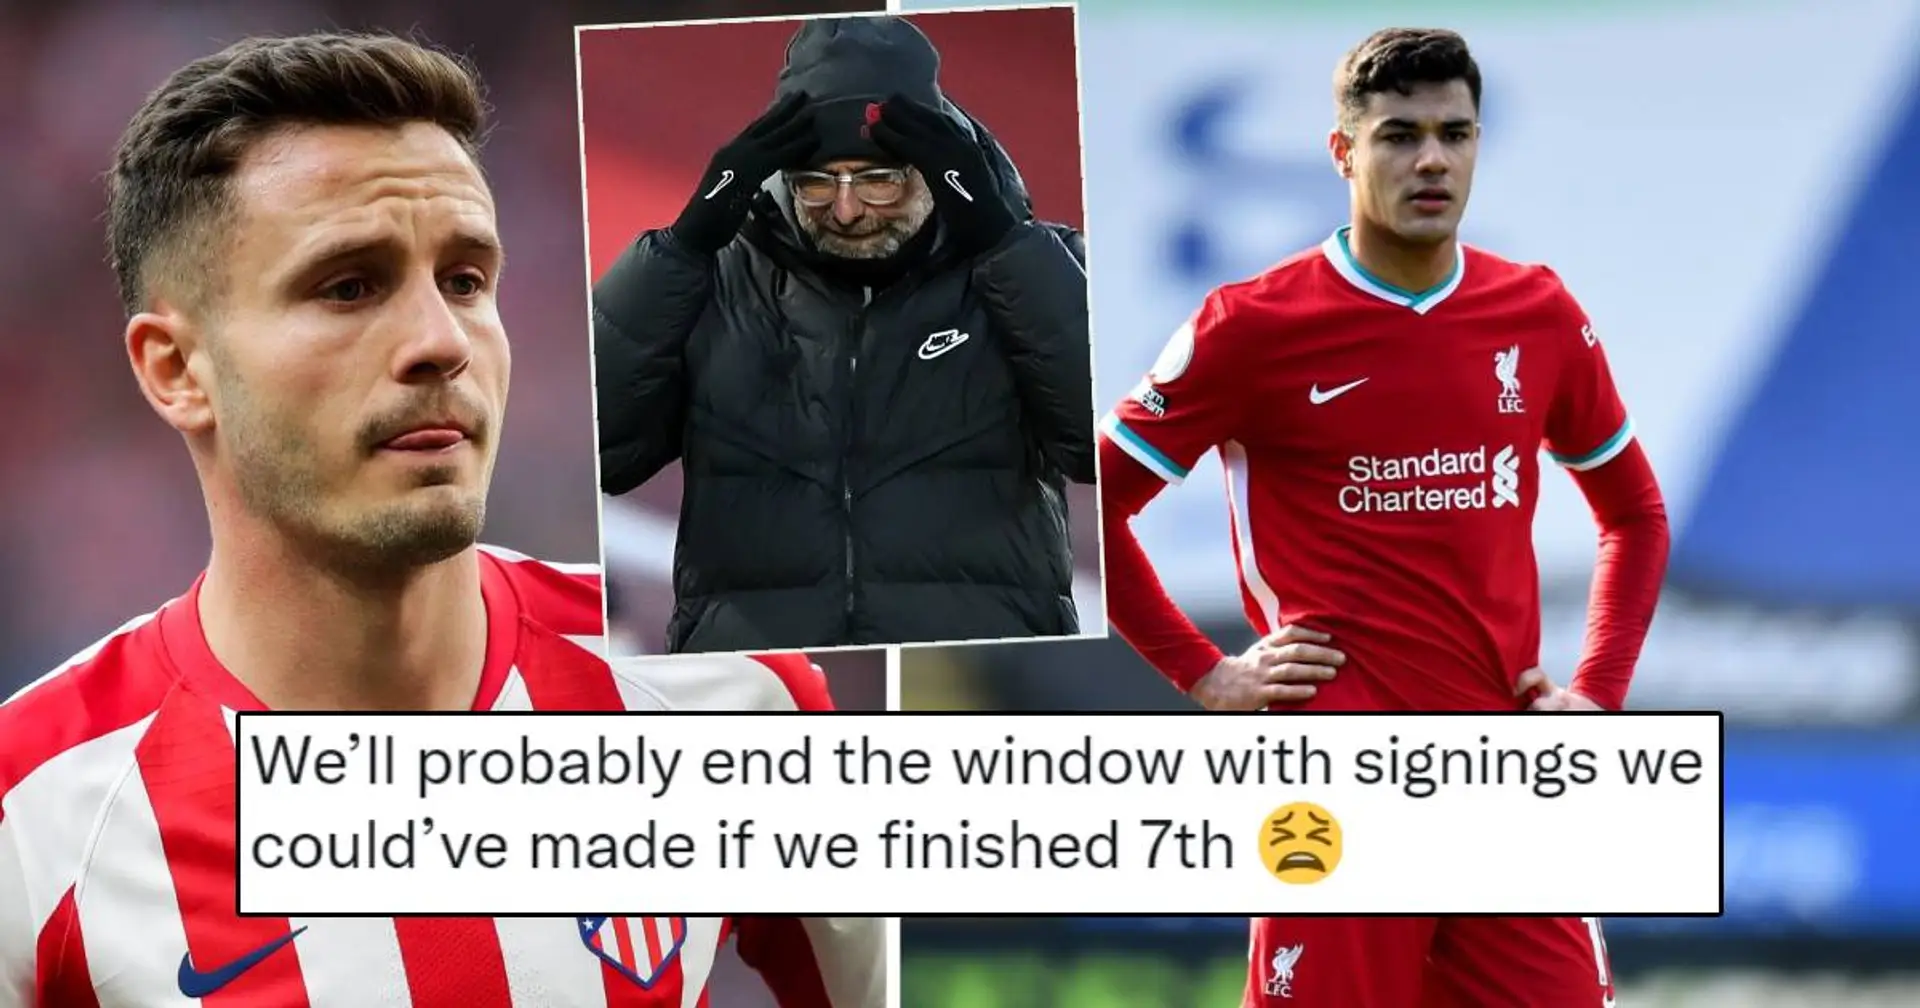 'Never seen a big club act so embarrassingly': Liverpool's slow movement in transfer window has fans frustrated 